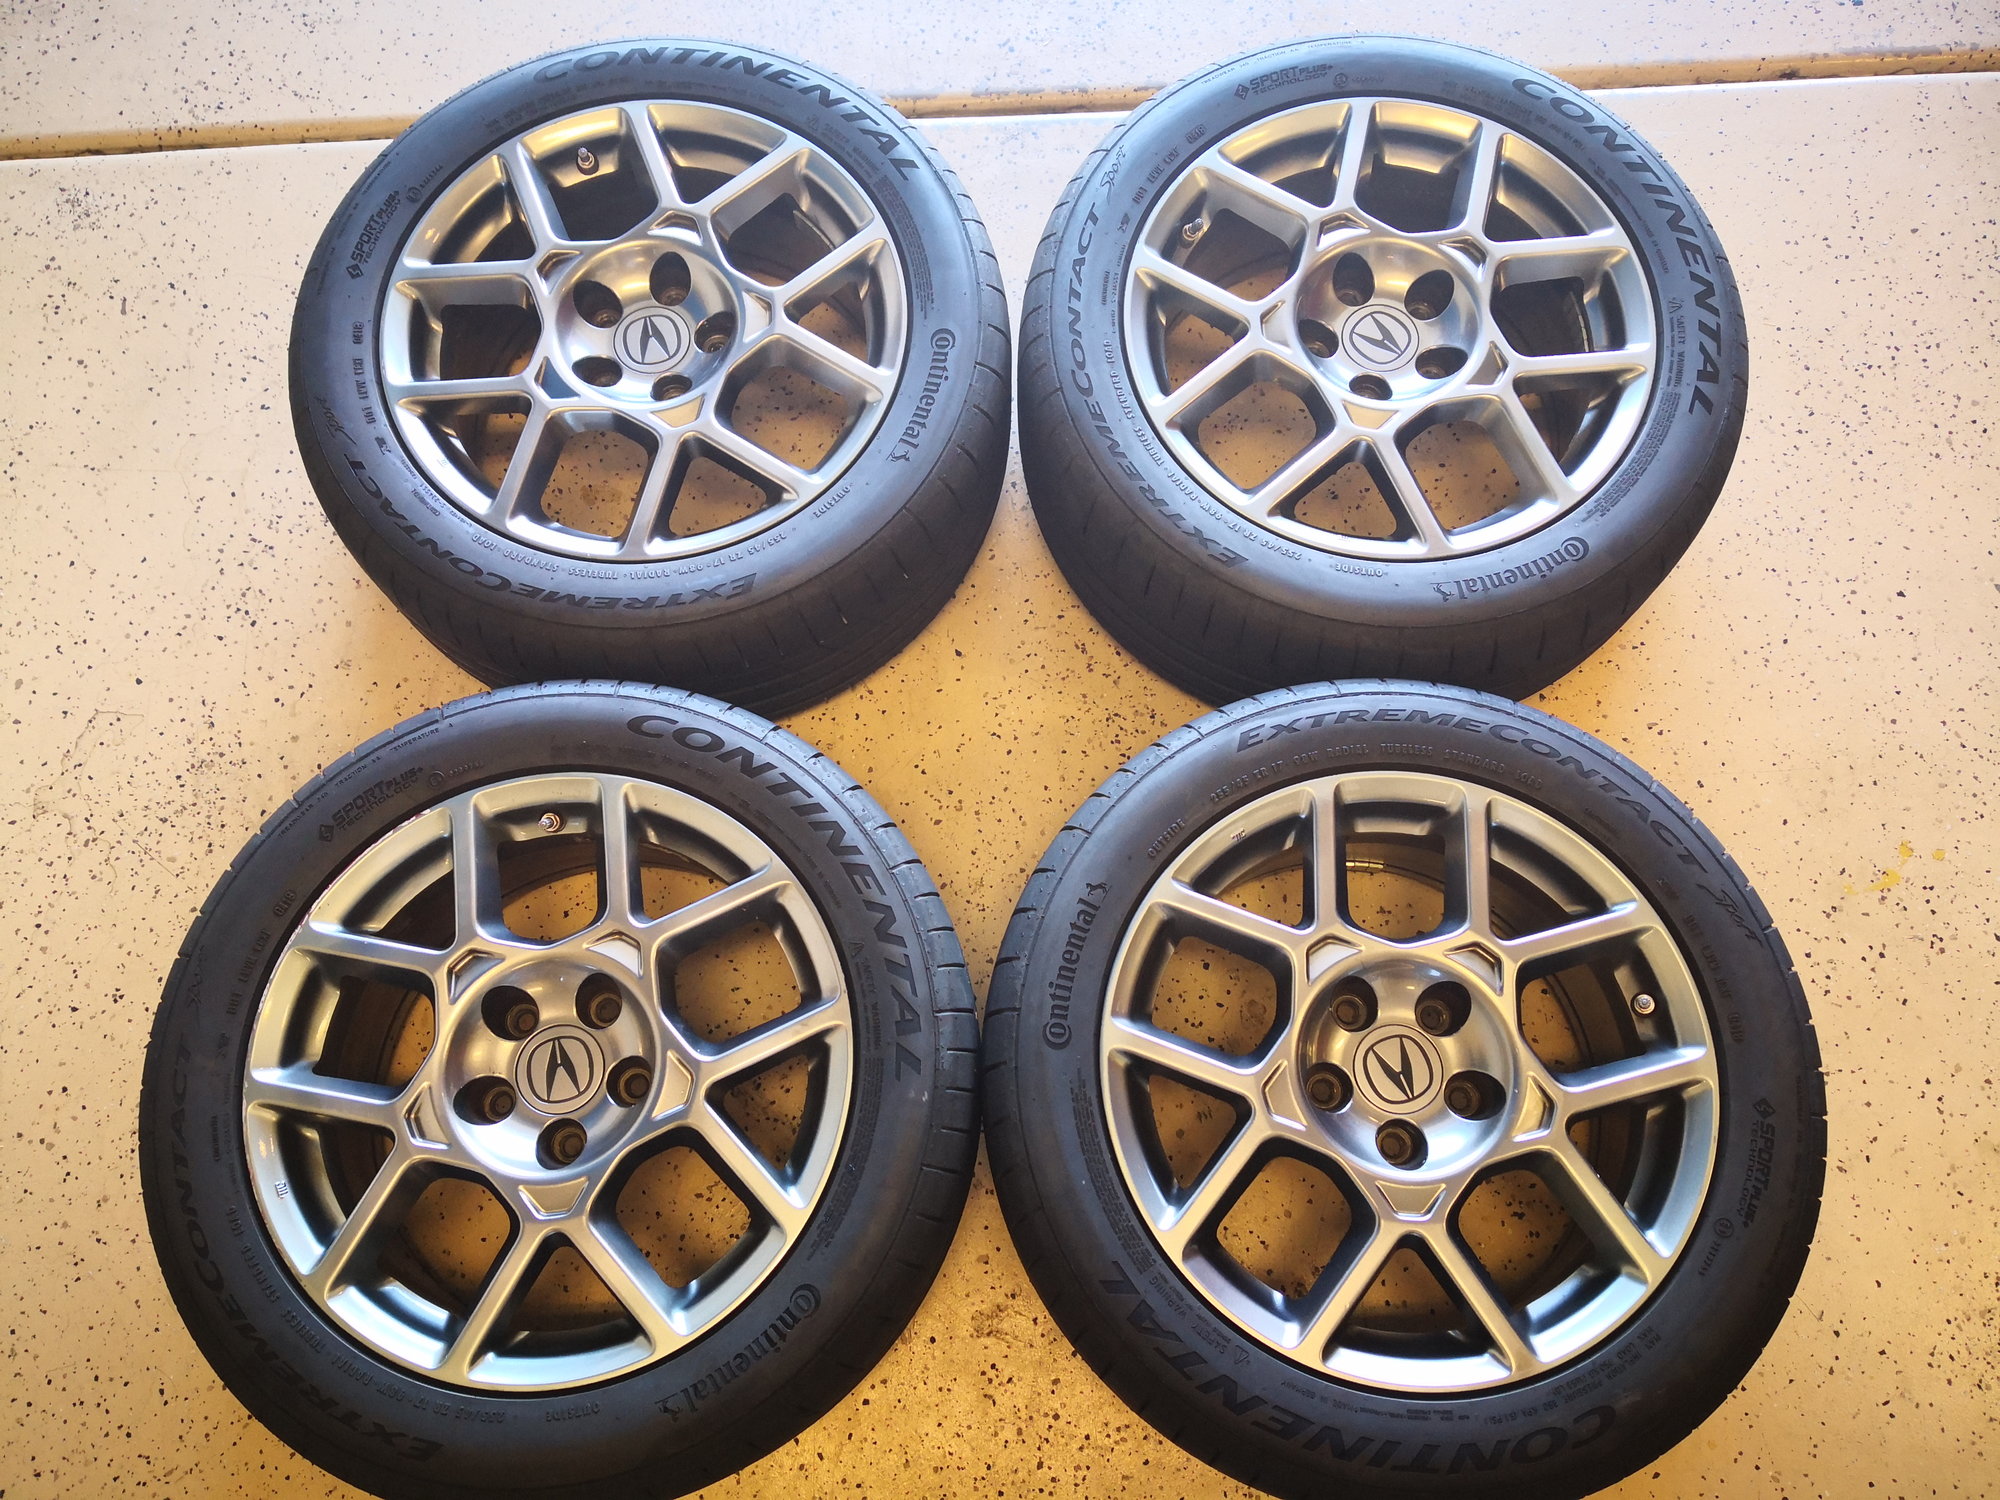 Wheels and Tires/Axles - SOLD: OEM Type S 17x8 Wheels w/ Continental ExtremeContact Sport 255/45R17 Tires - Used - 2004 to 2008 Acura TL - Phoenix, AZ 85207, United States